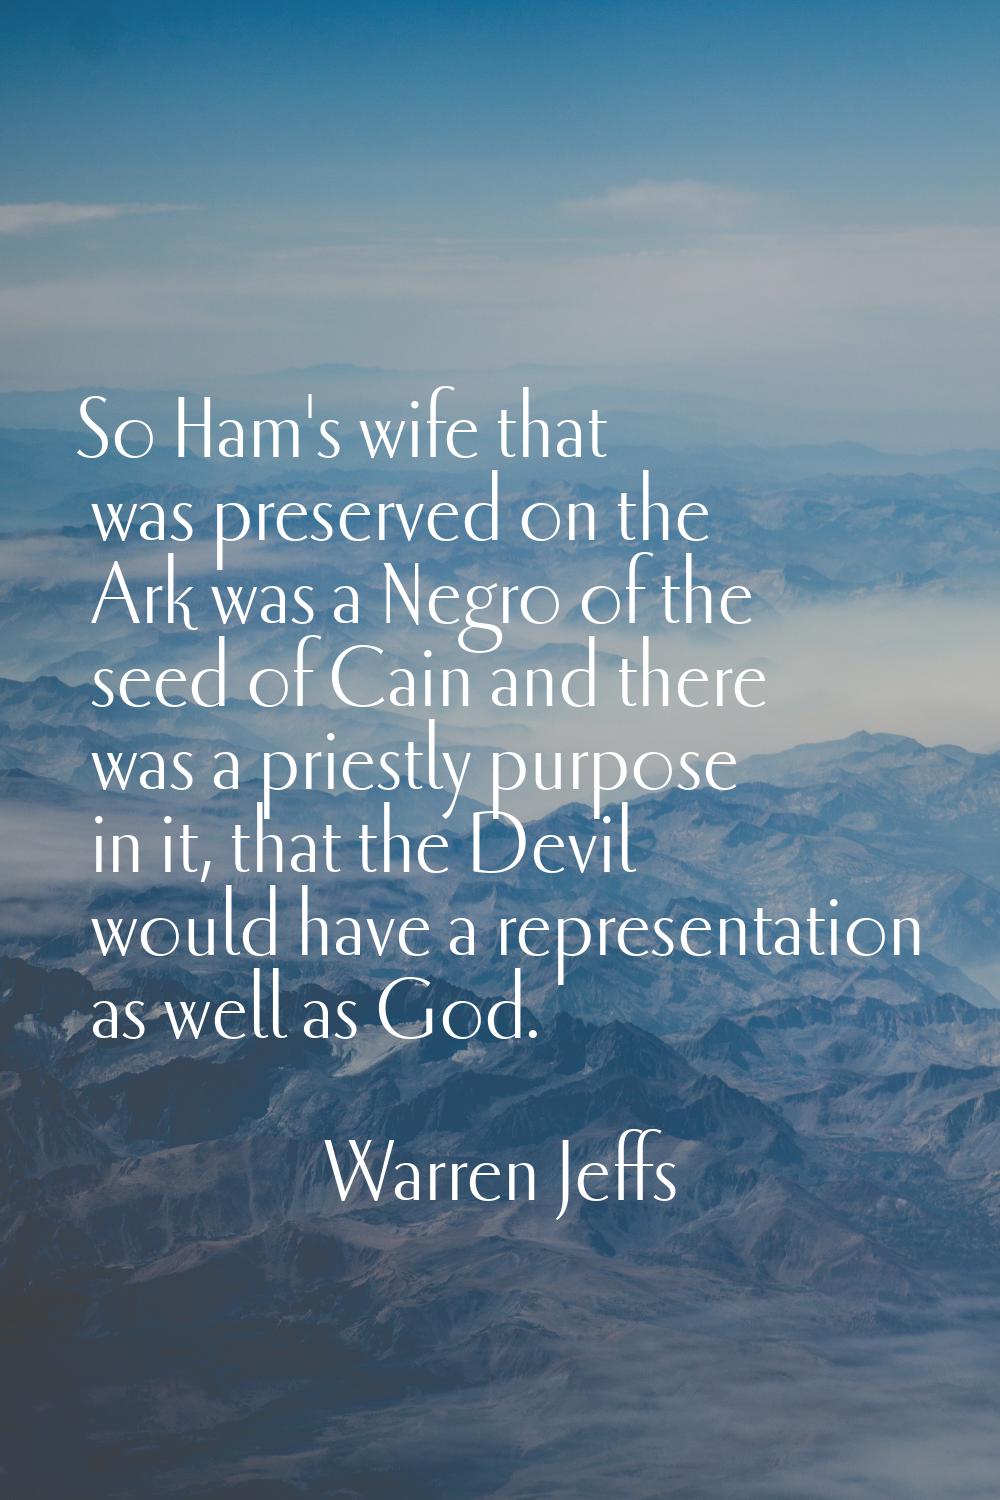 So Ham's wife that was preserved on the Ark was a Negro of the seed of Cain and there was a priestl